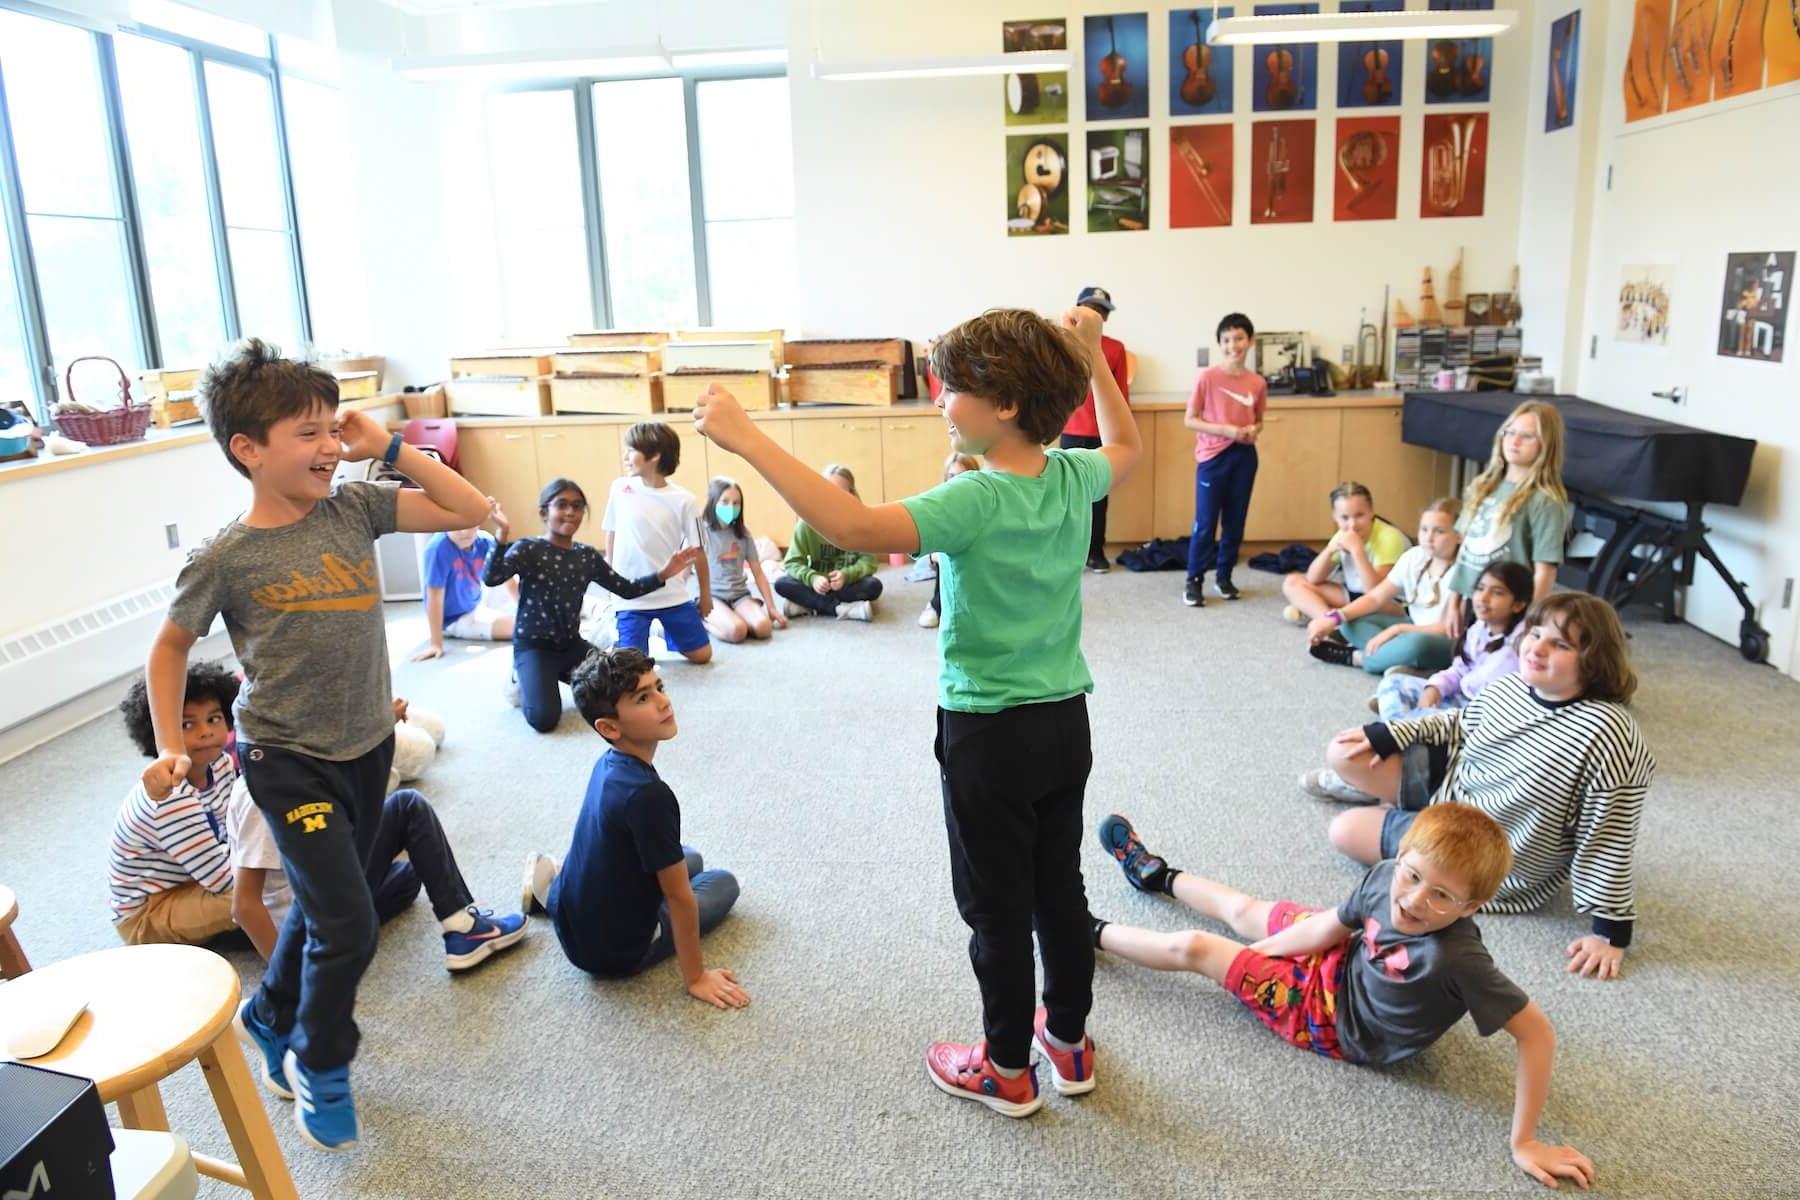 Ethical Culture Fieldston School Fieldston Lower students sitting in circle during music class